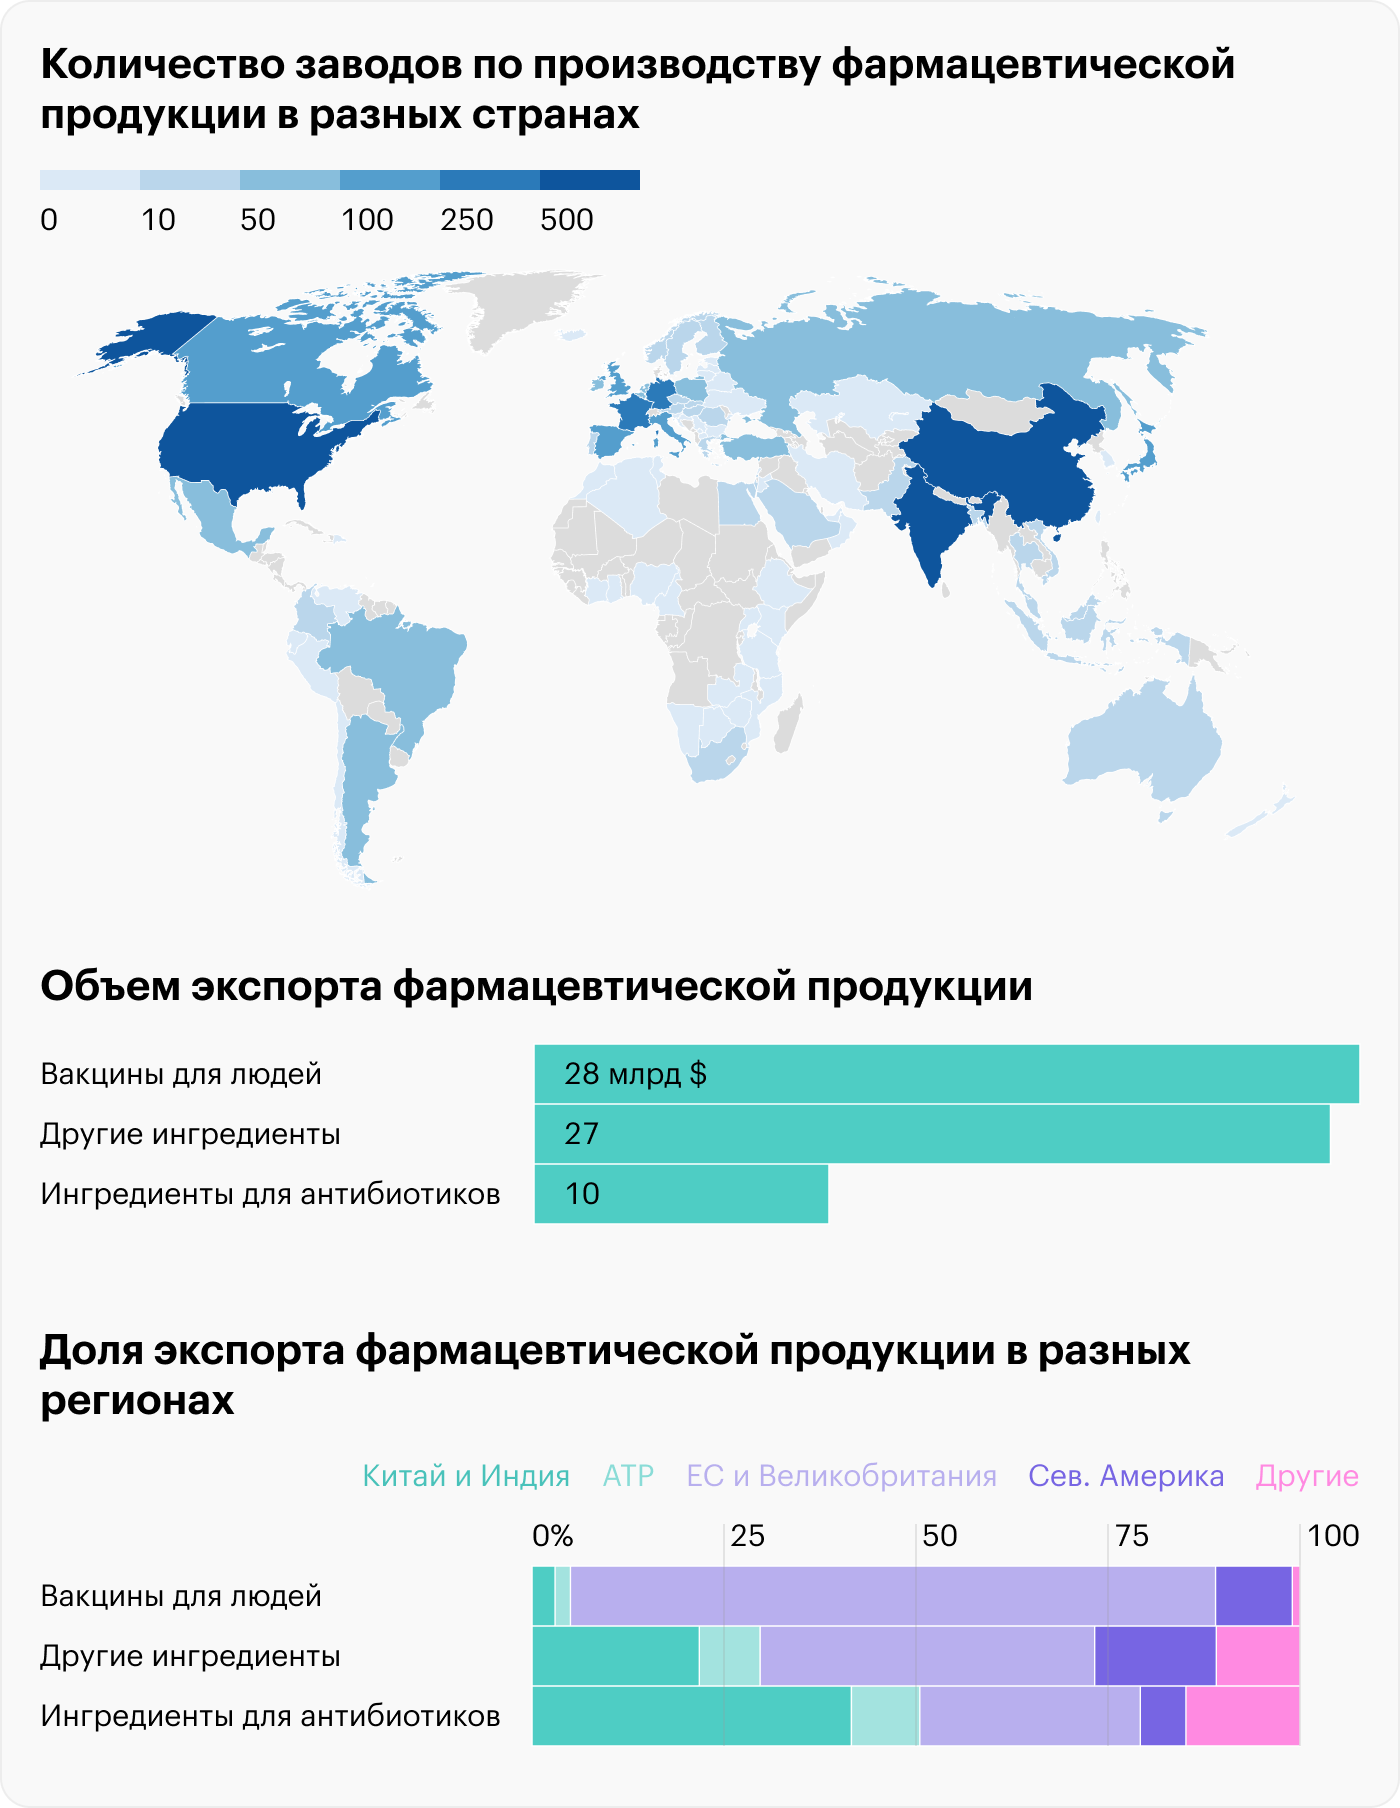 Источник: McKinsey, Risk, resilience, and rebalancing in global value chains, стр. 64 (74)